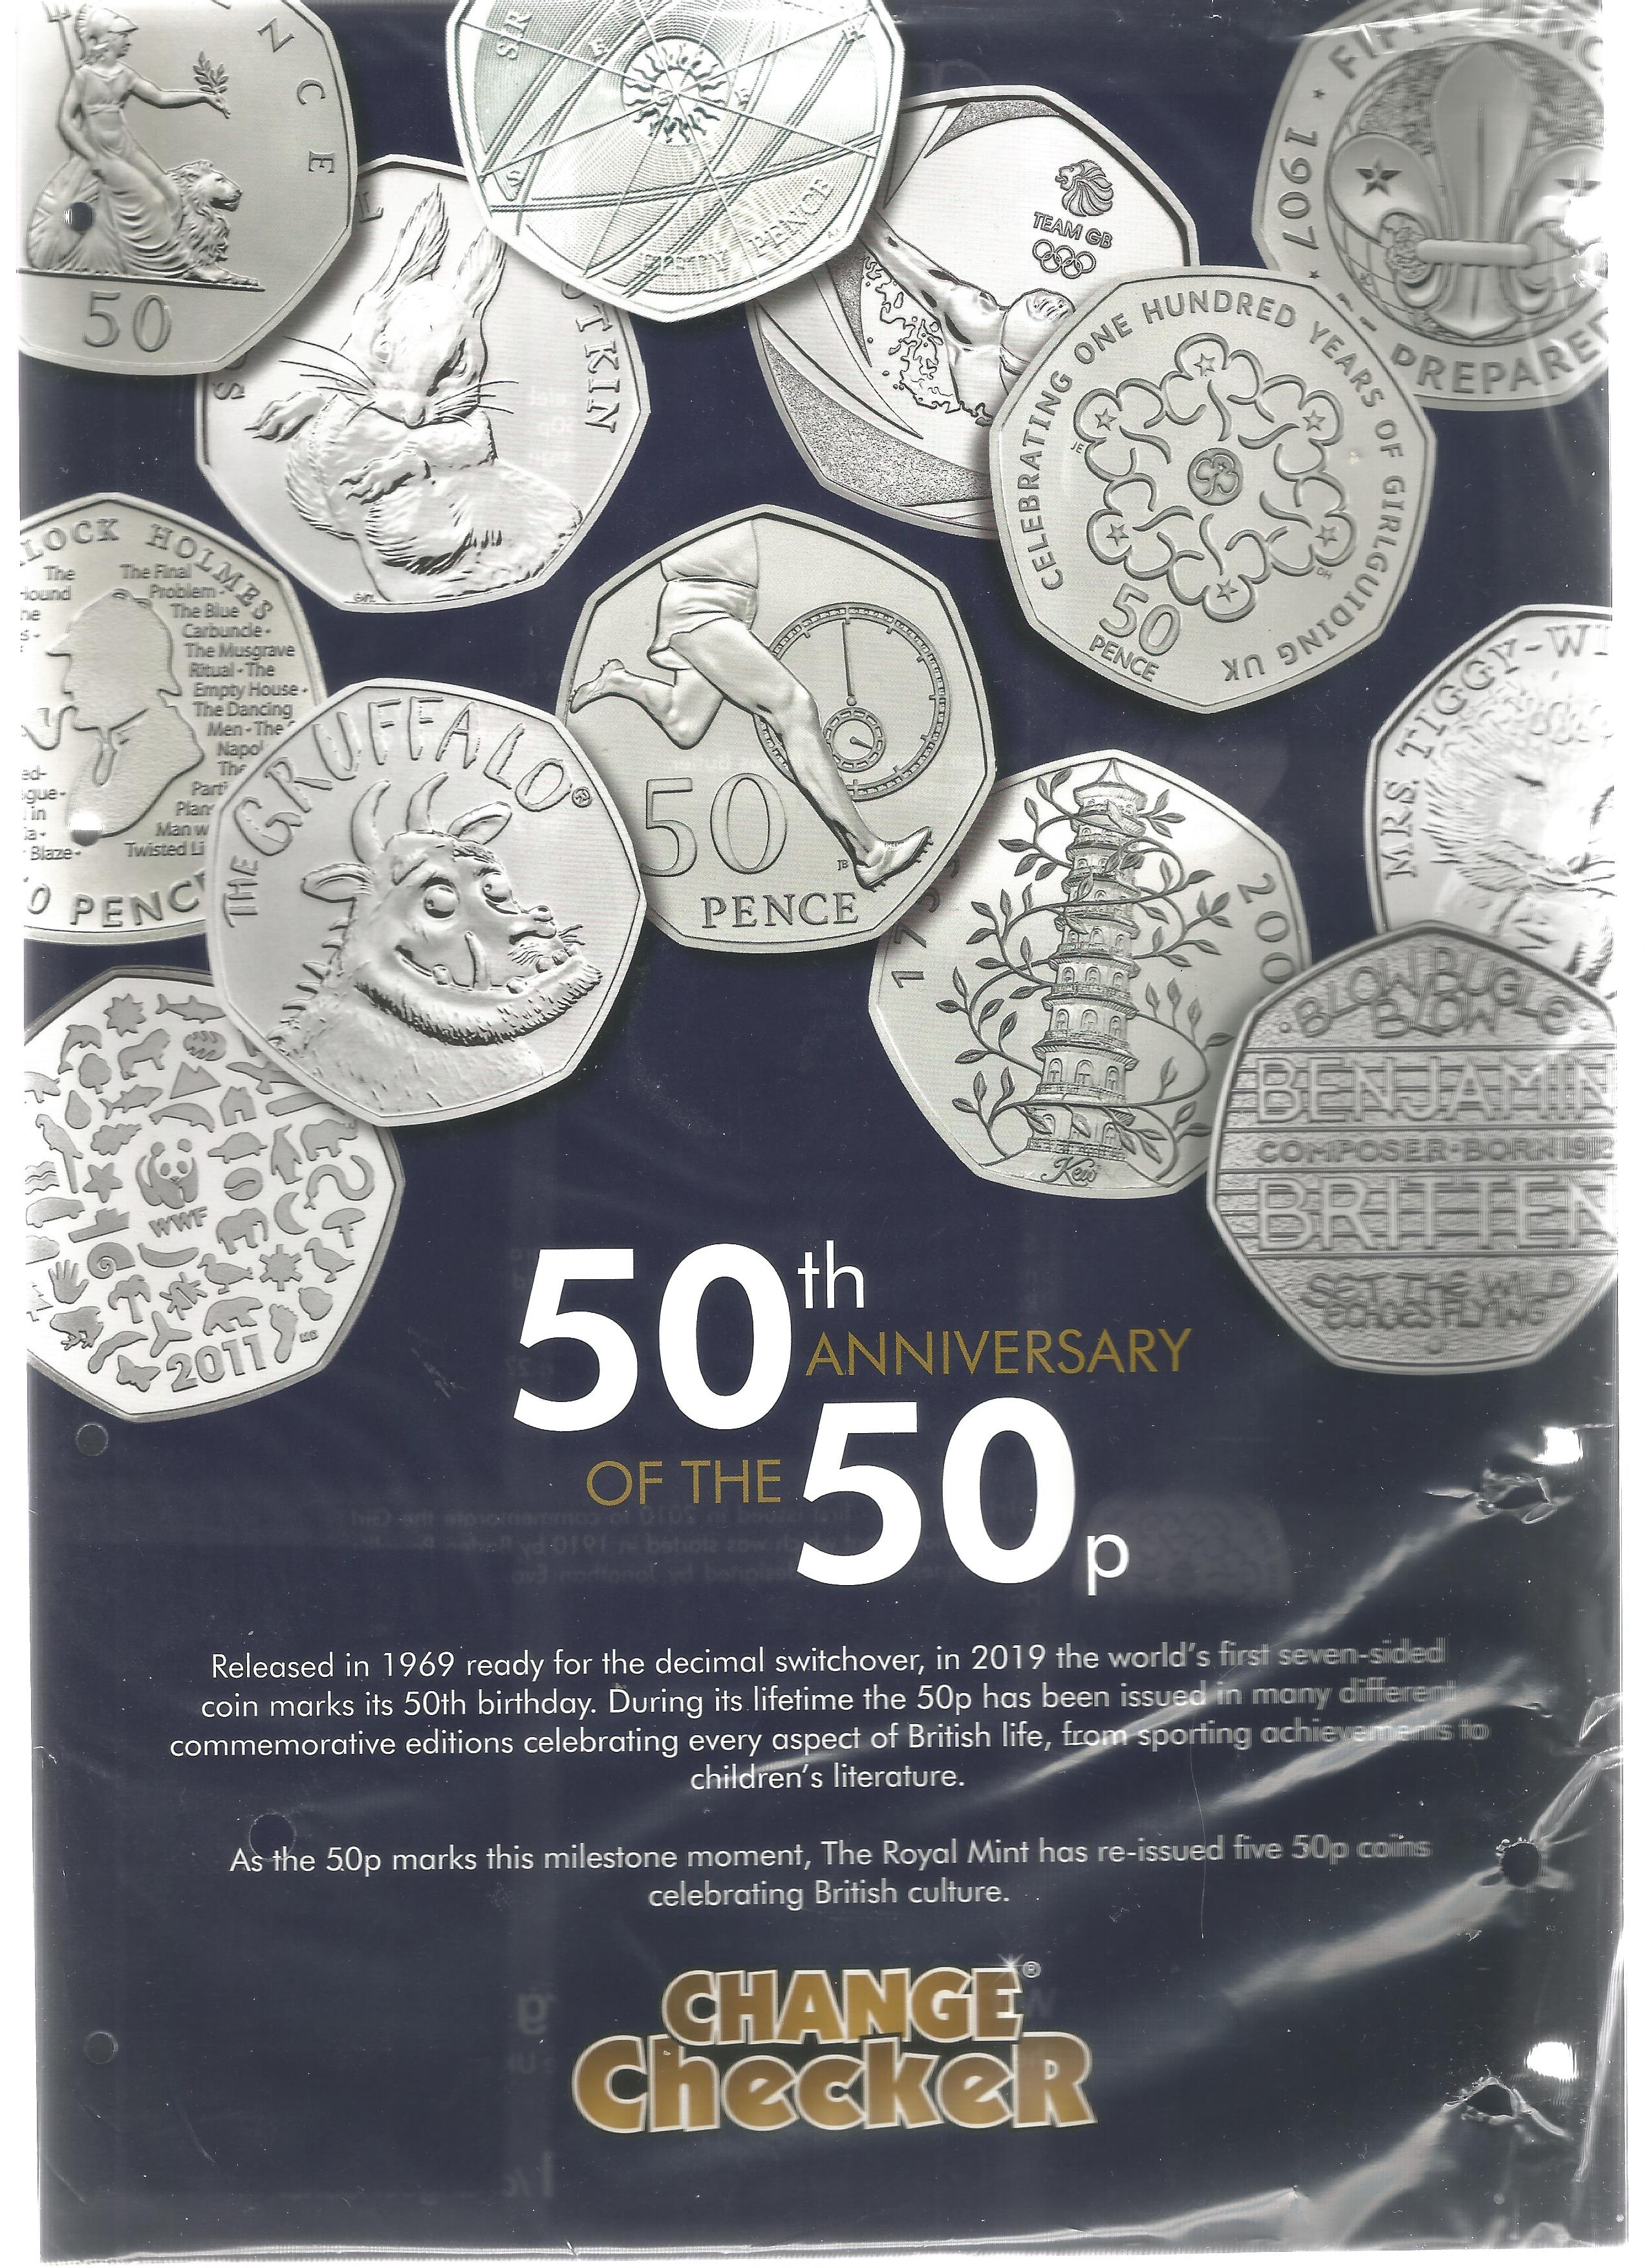 Change Checker Album / Binder with a few Commemorative 50p coins 50th Anniversary of the 50p 2019, - Image 2 of 2